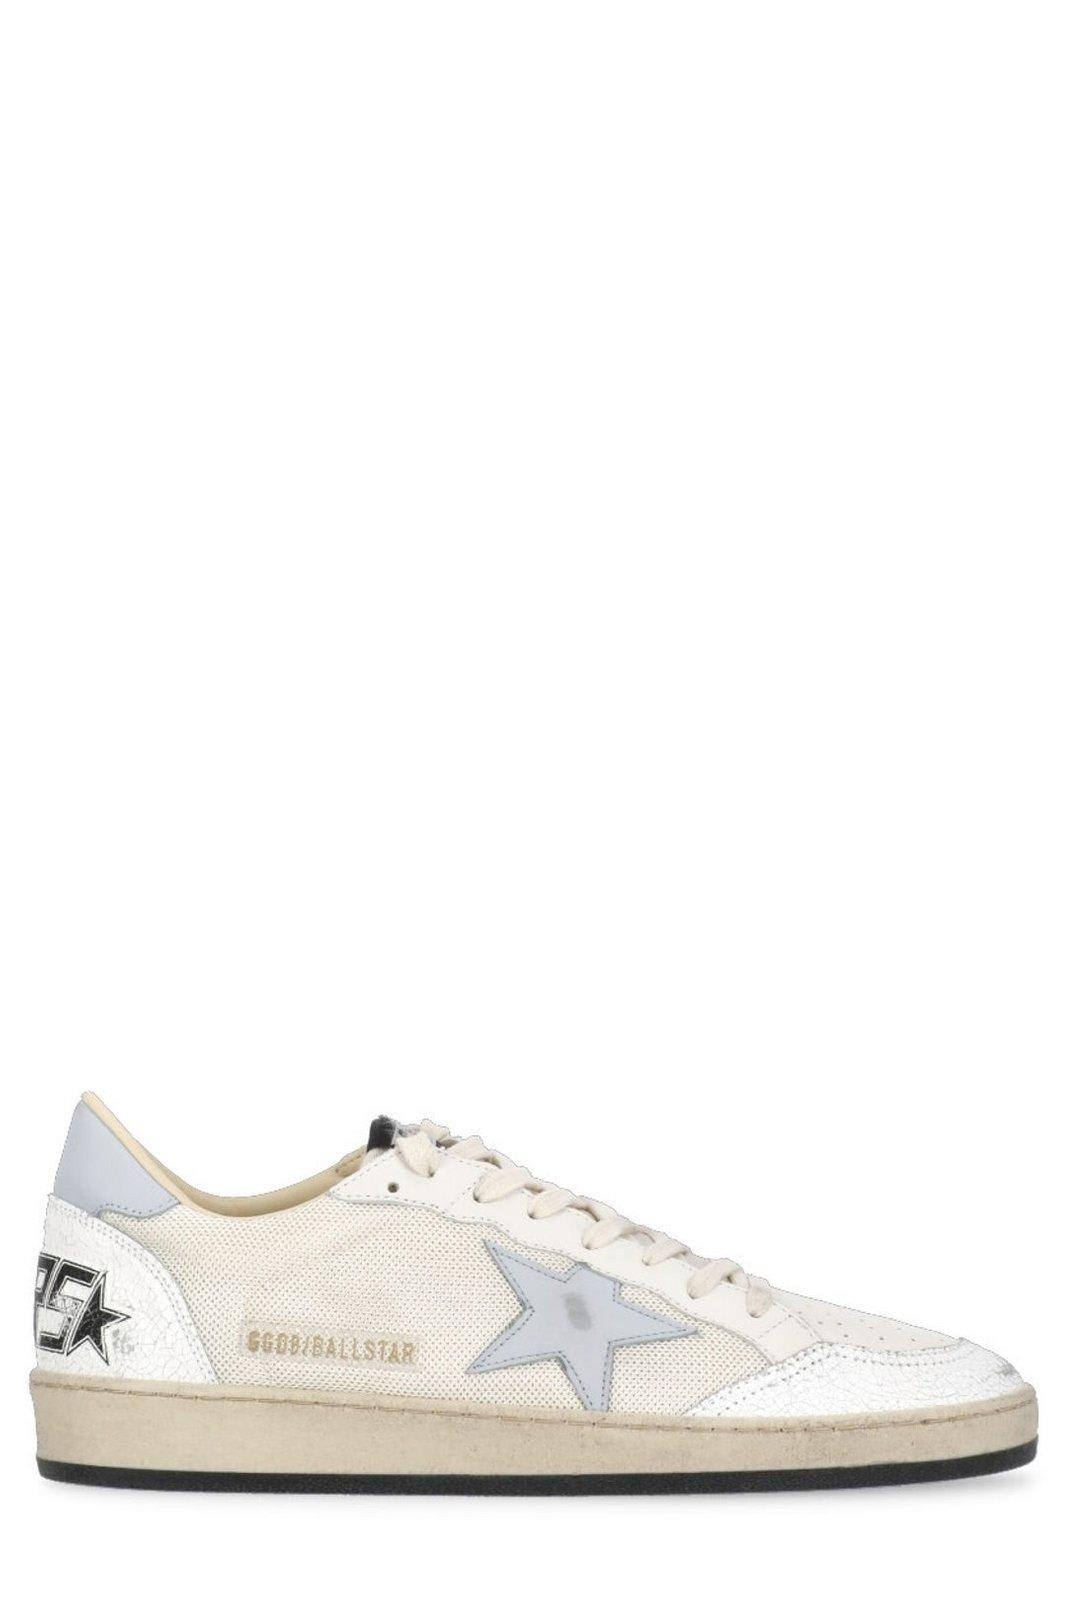 Golden Goose Star Patch Lace-up Sneakers In White/cream/gray Dawn